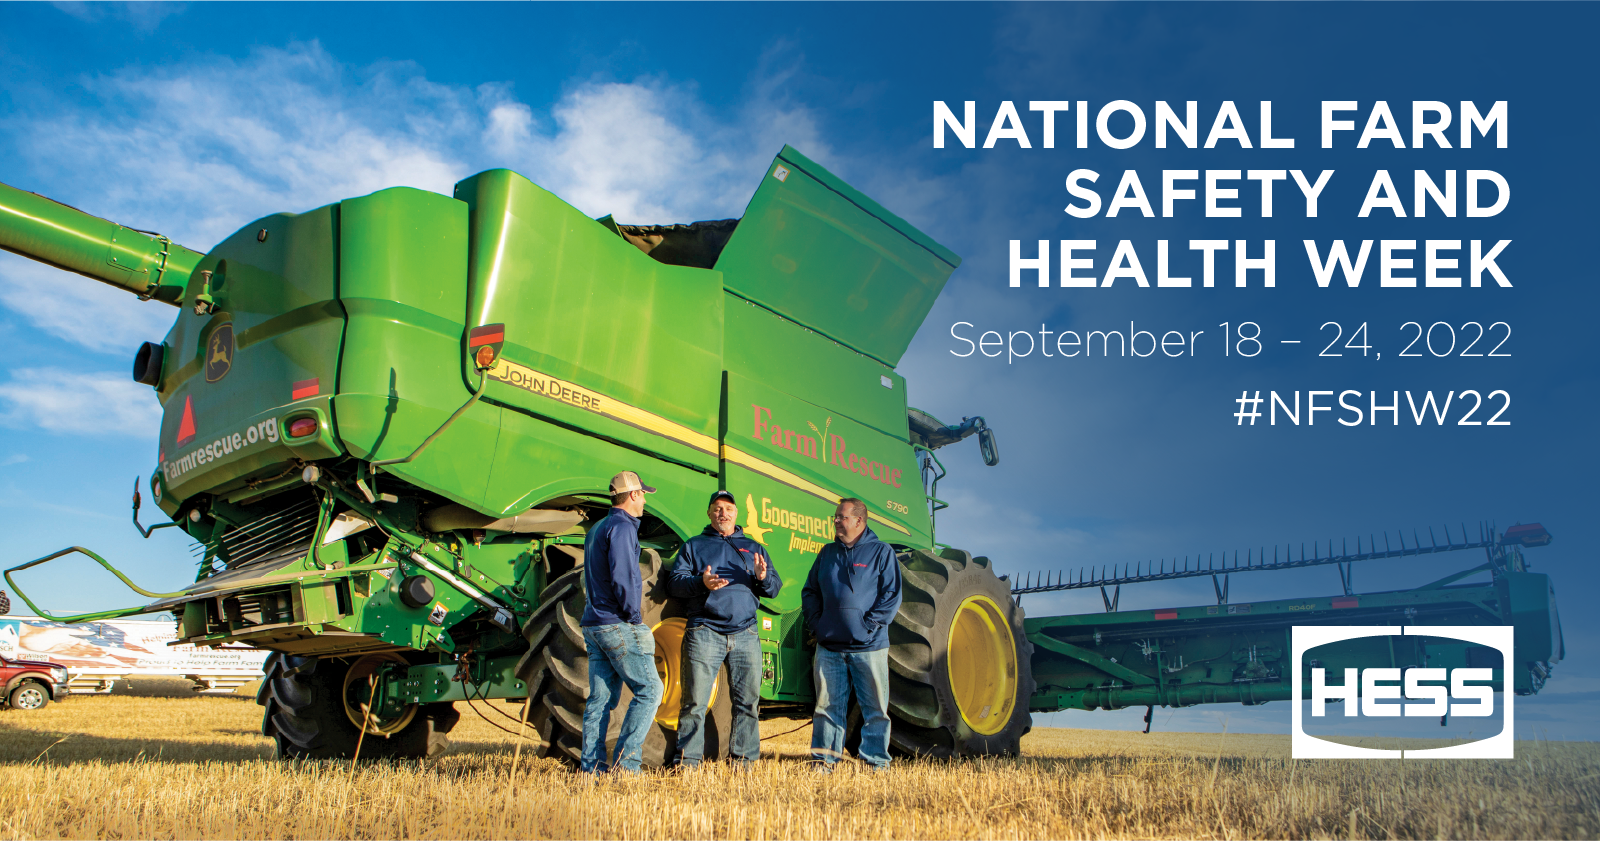 Hess Recognizes National Farm Safety and Health Week